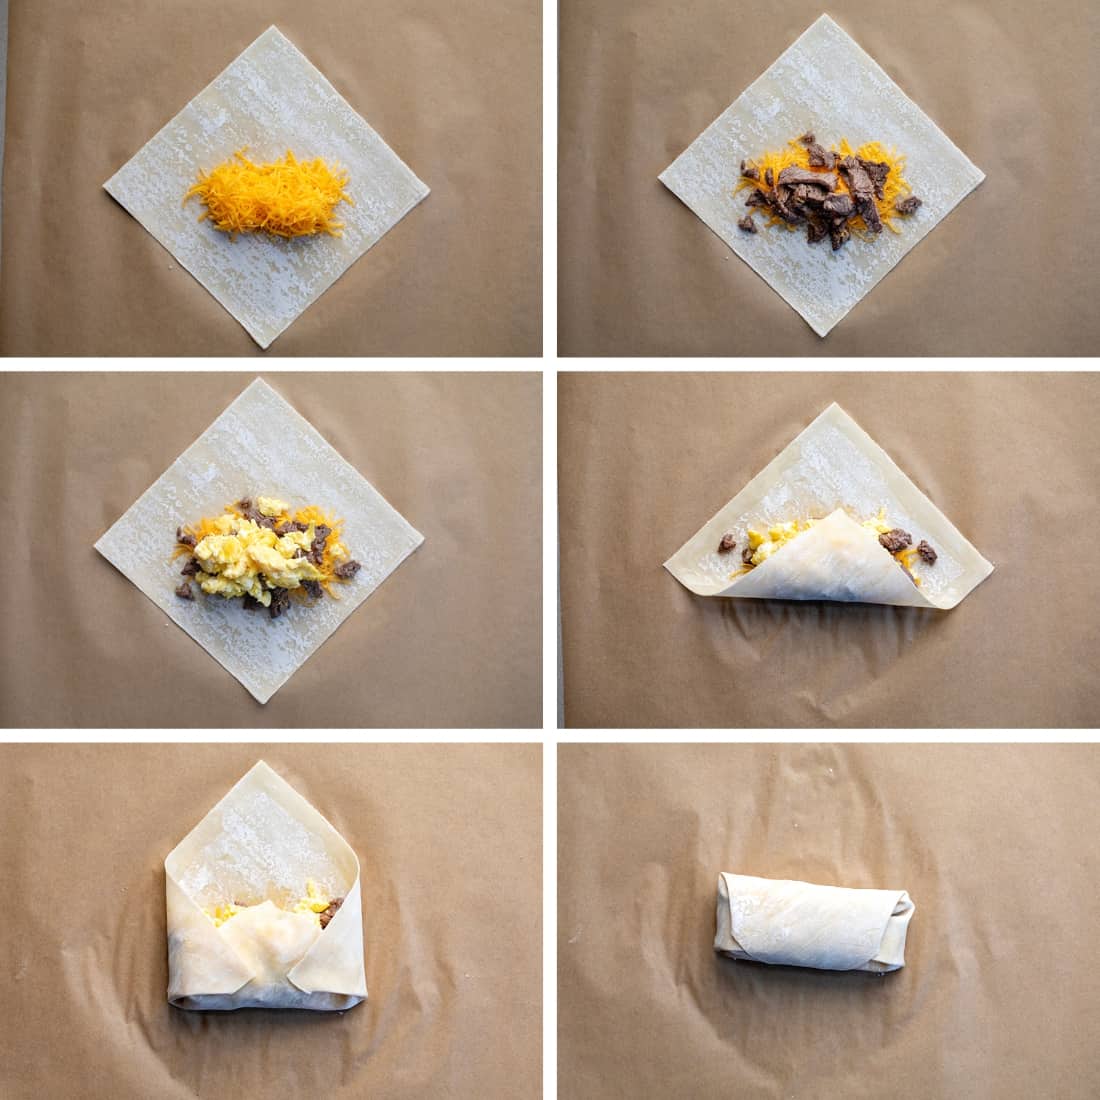 Process images for assembling a Steak Egg and Cheese Egg Rolls with Wonton Wrappers.